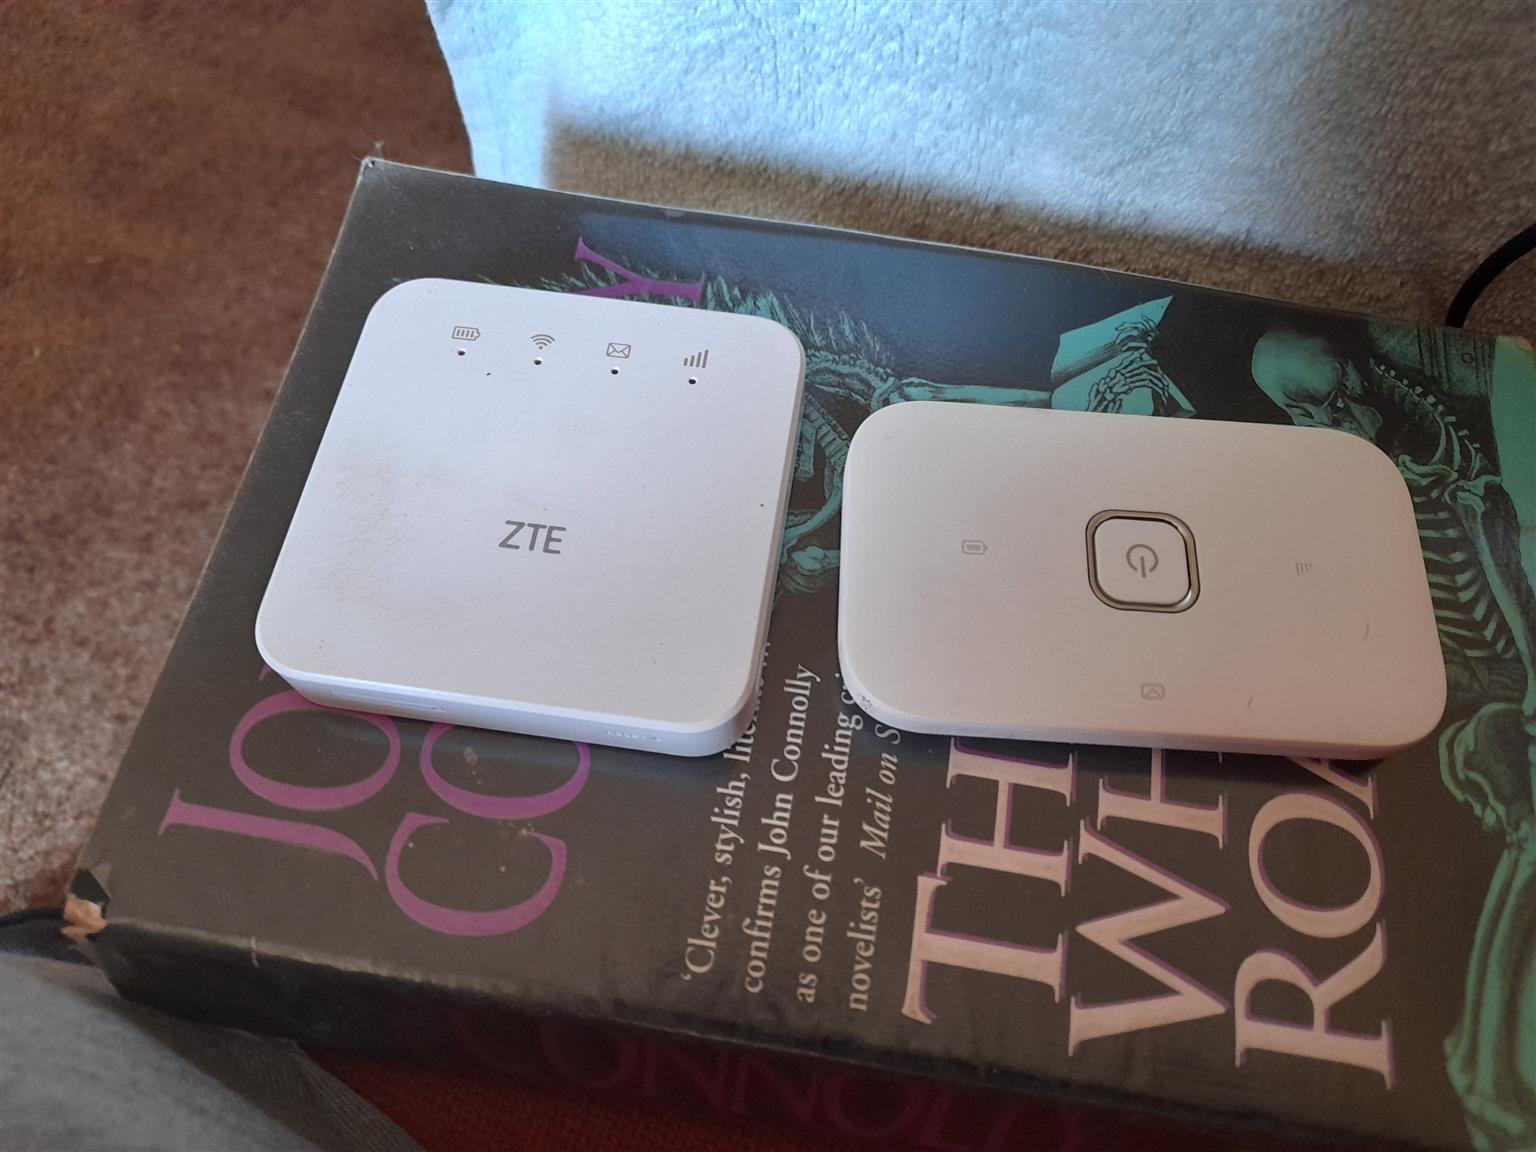 Vodacom and Cell C mini wifi routers for sale